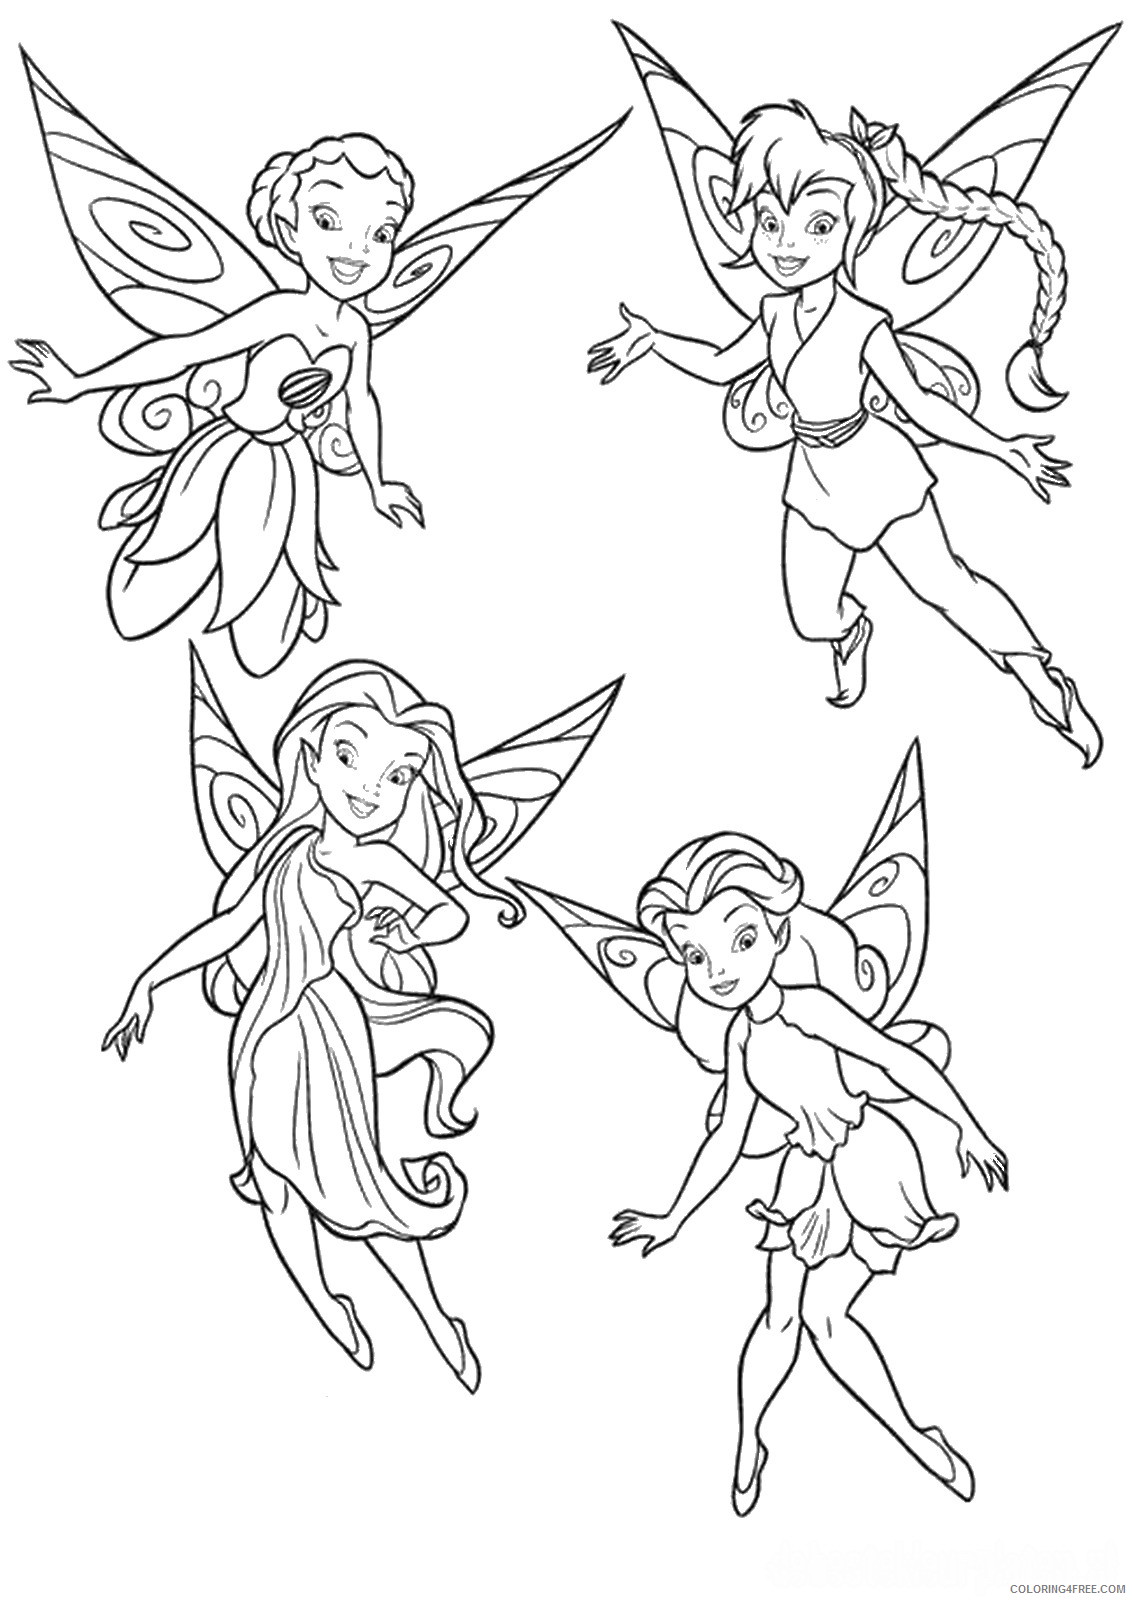 Tinker Bell Coloring Pages Cartoons tinkerbell_cl_23 Printable 2020 6630 Coloring4free